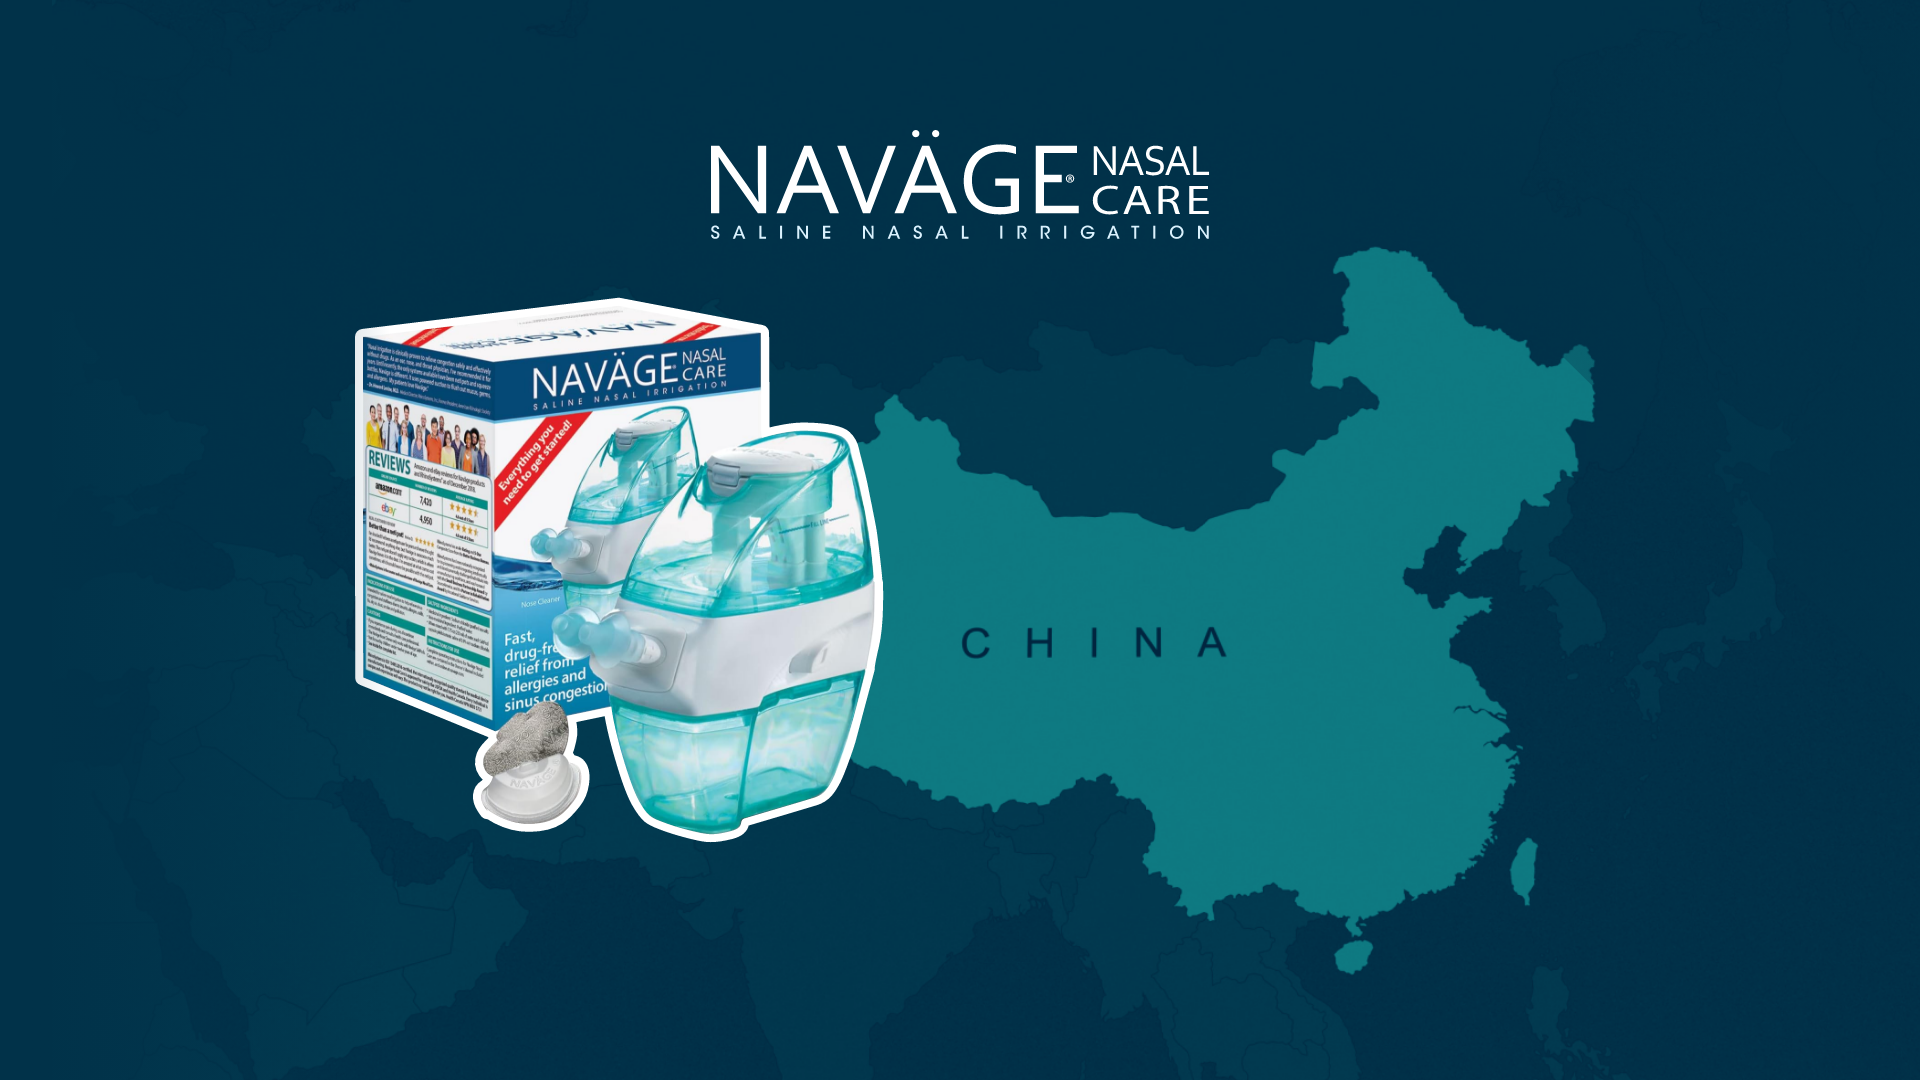 Navage nasal care product and a map of China